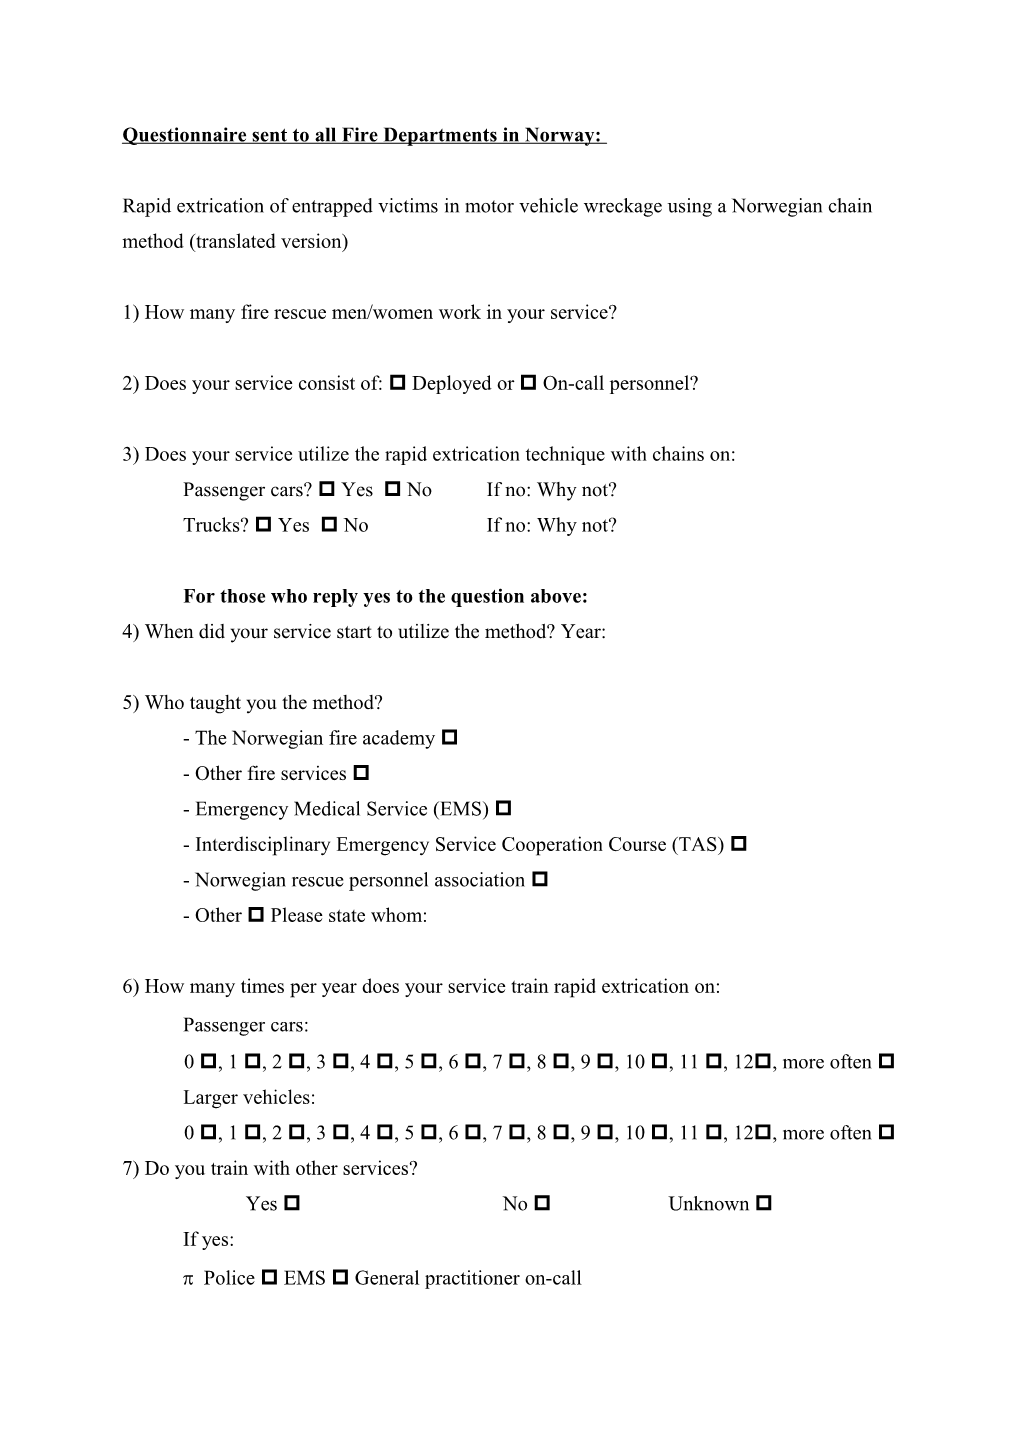 Questionnaire Sent to All Fire Departments in Norway